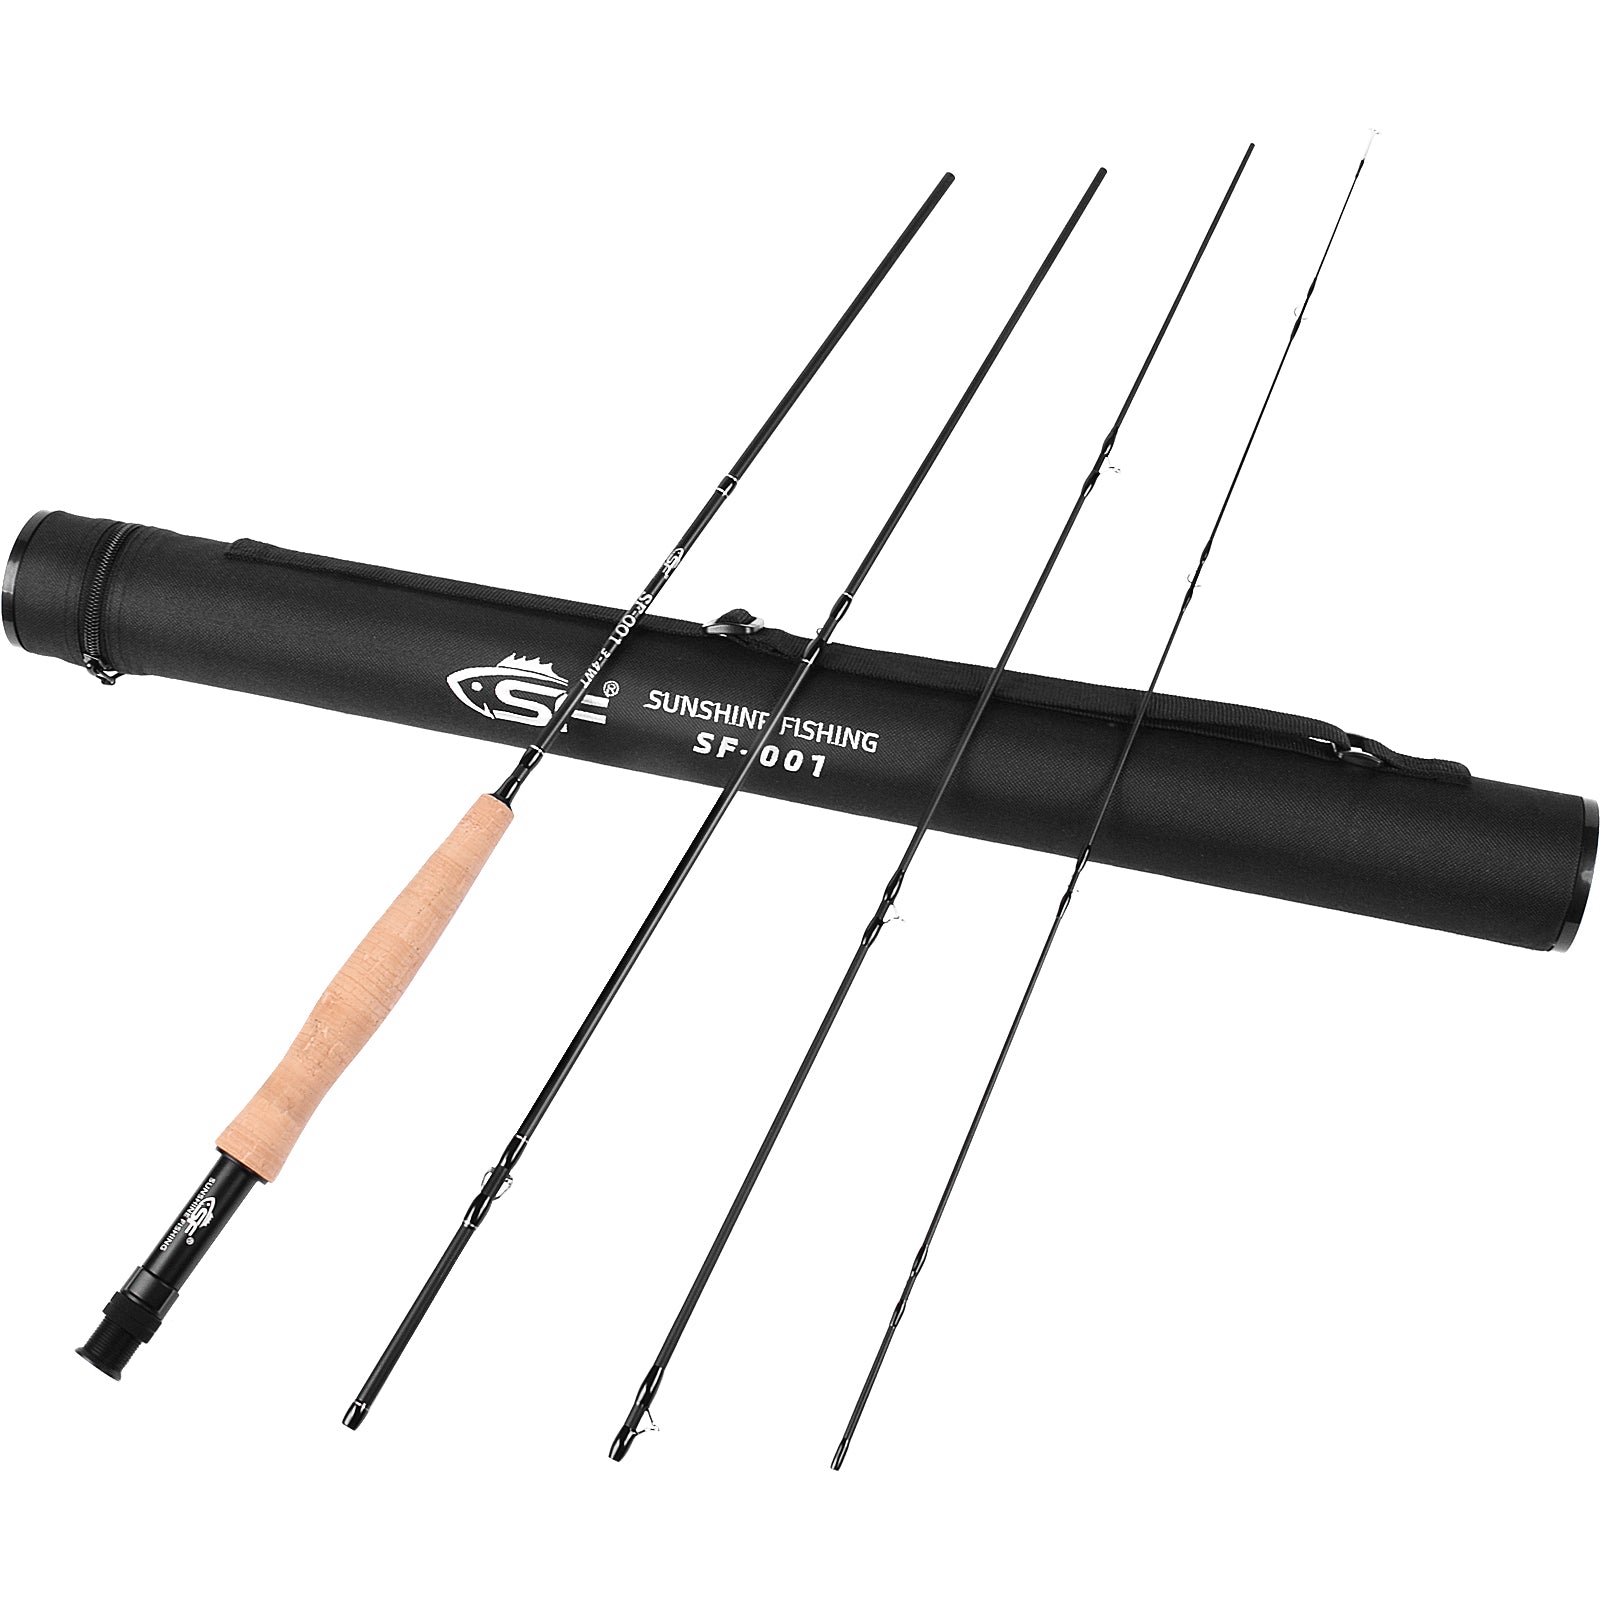 8ft 3-4wt or 5-6wt 4 Pieces Graphite Carbon Fiber Fly Fishing Rod Light  Feel Medium Fast Action Freshwater Fly Rod